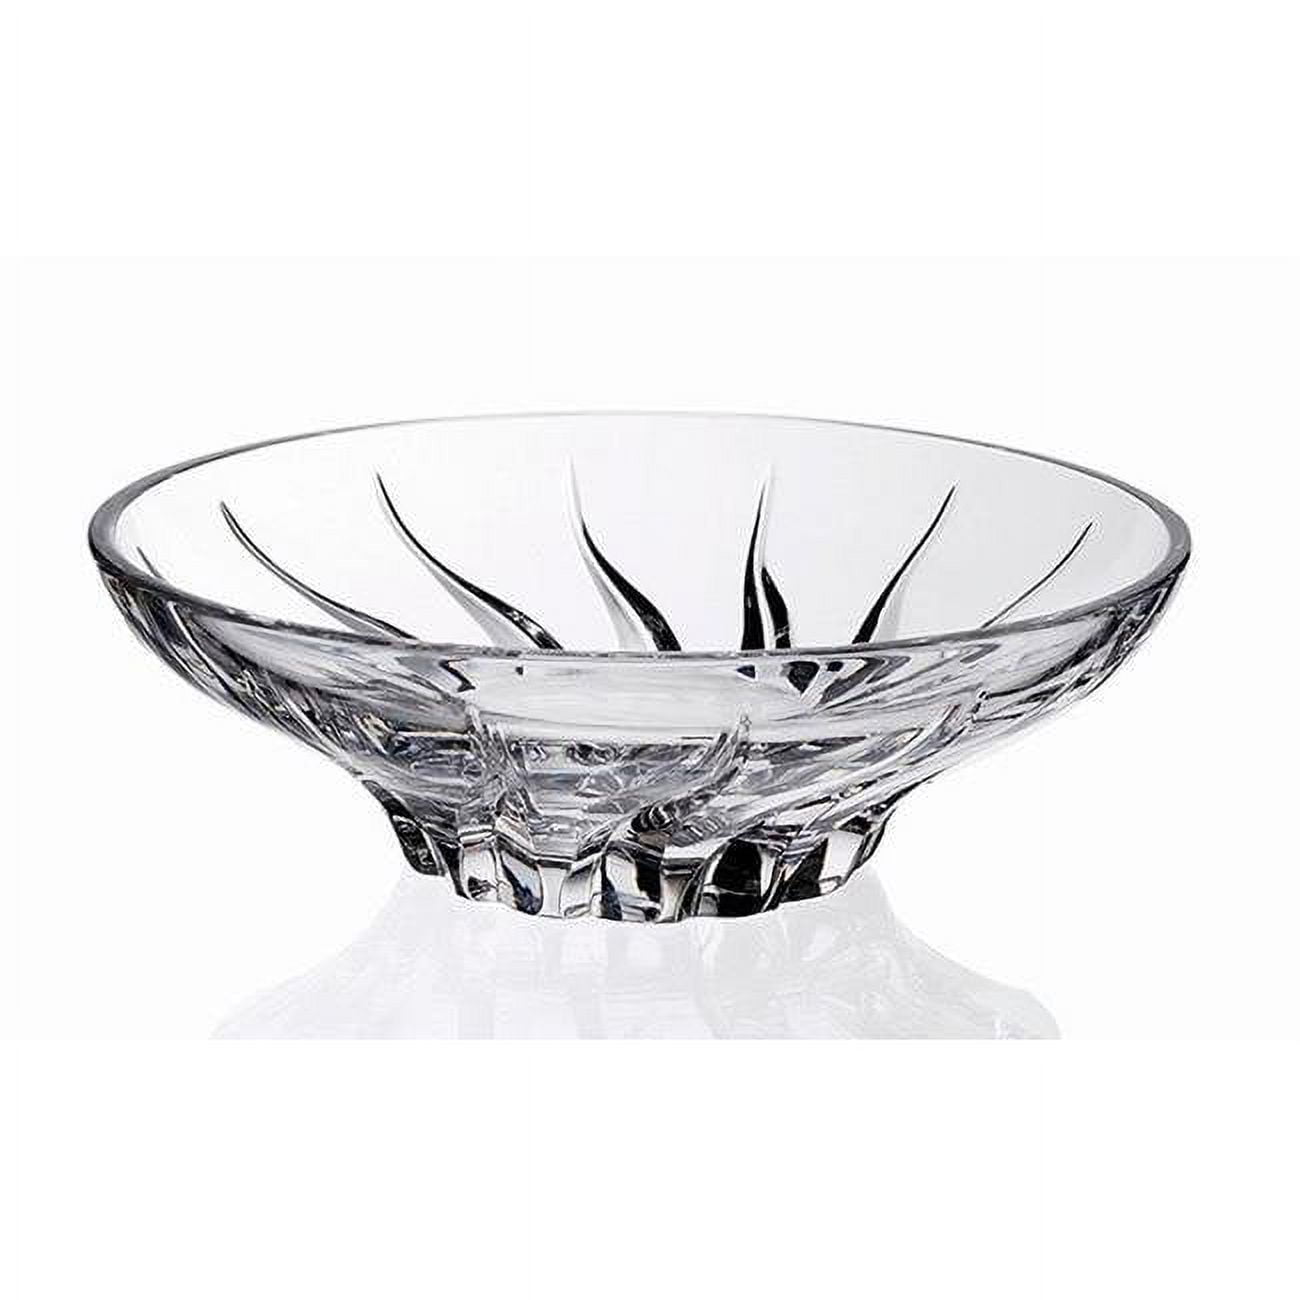 Pasabahce Large Clear Mixing Bowl for Kitchen, All-Purpose Round Salad Bowl,  Glass Serving Bowl, Baking Bowl, 102 oz 